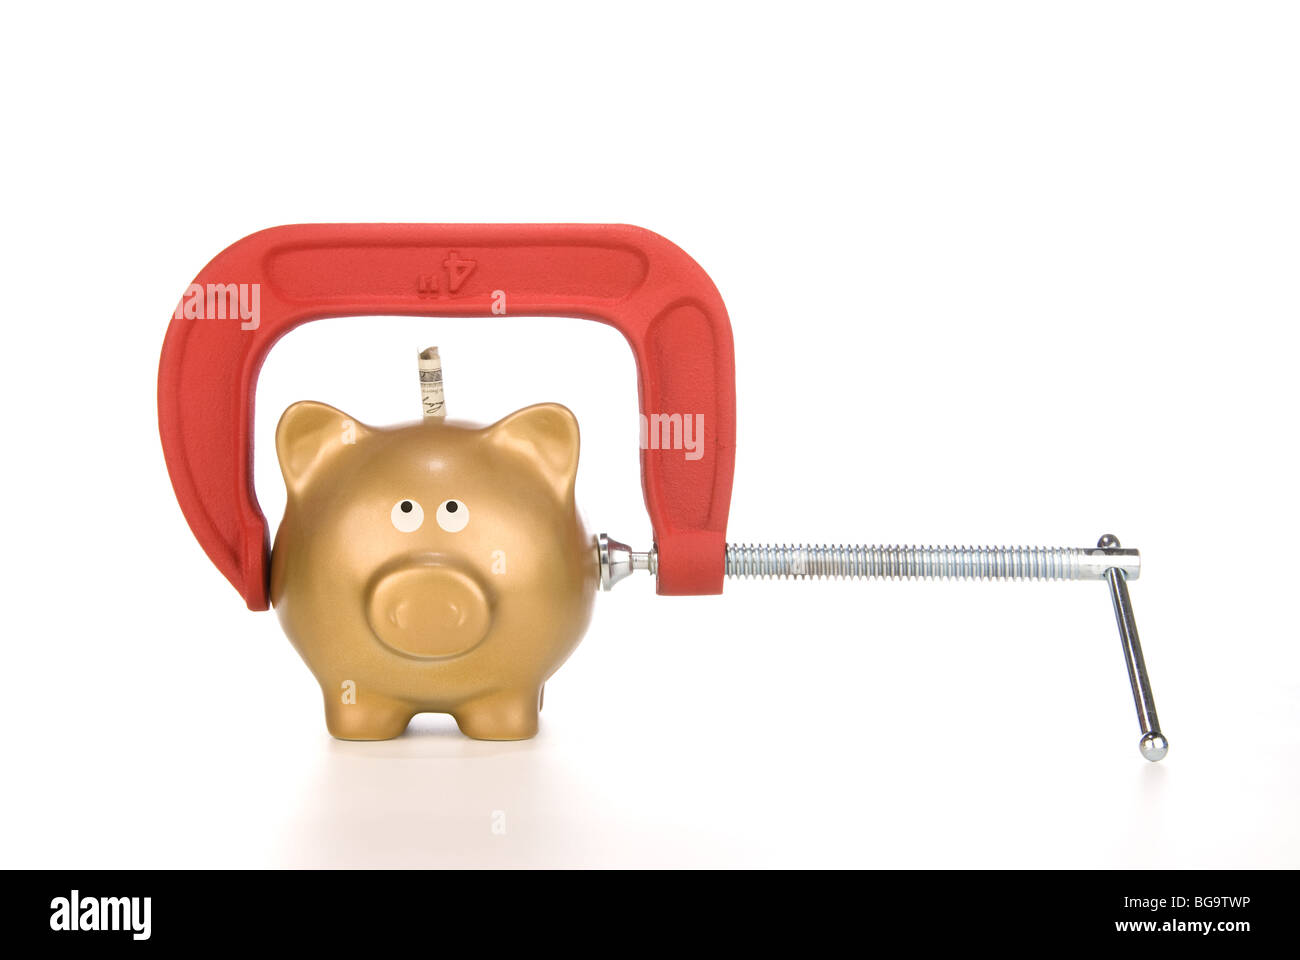 A golden piggy bank is being squeezed for its last dollar. Image can be used for many financial inferences. Stock Photo